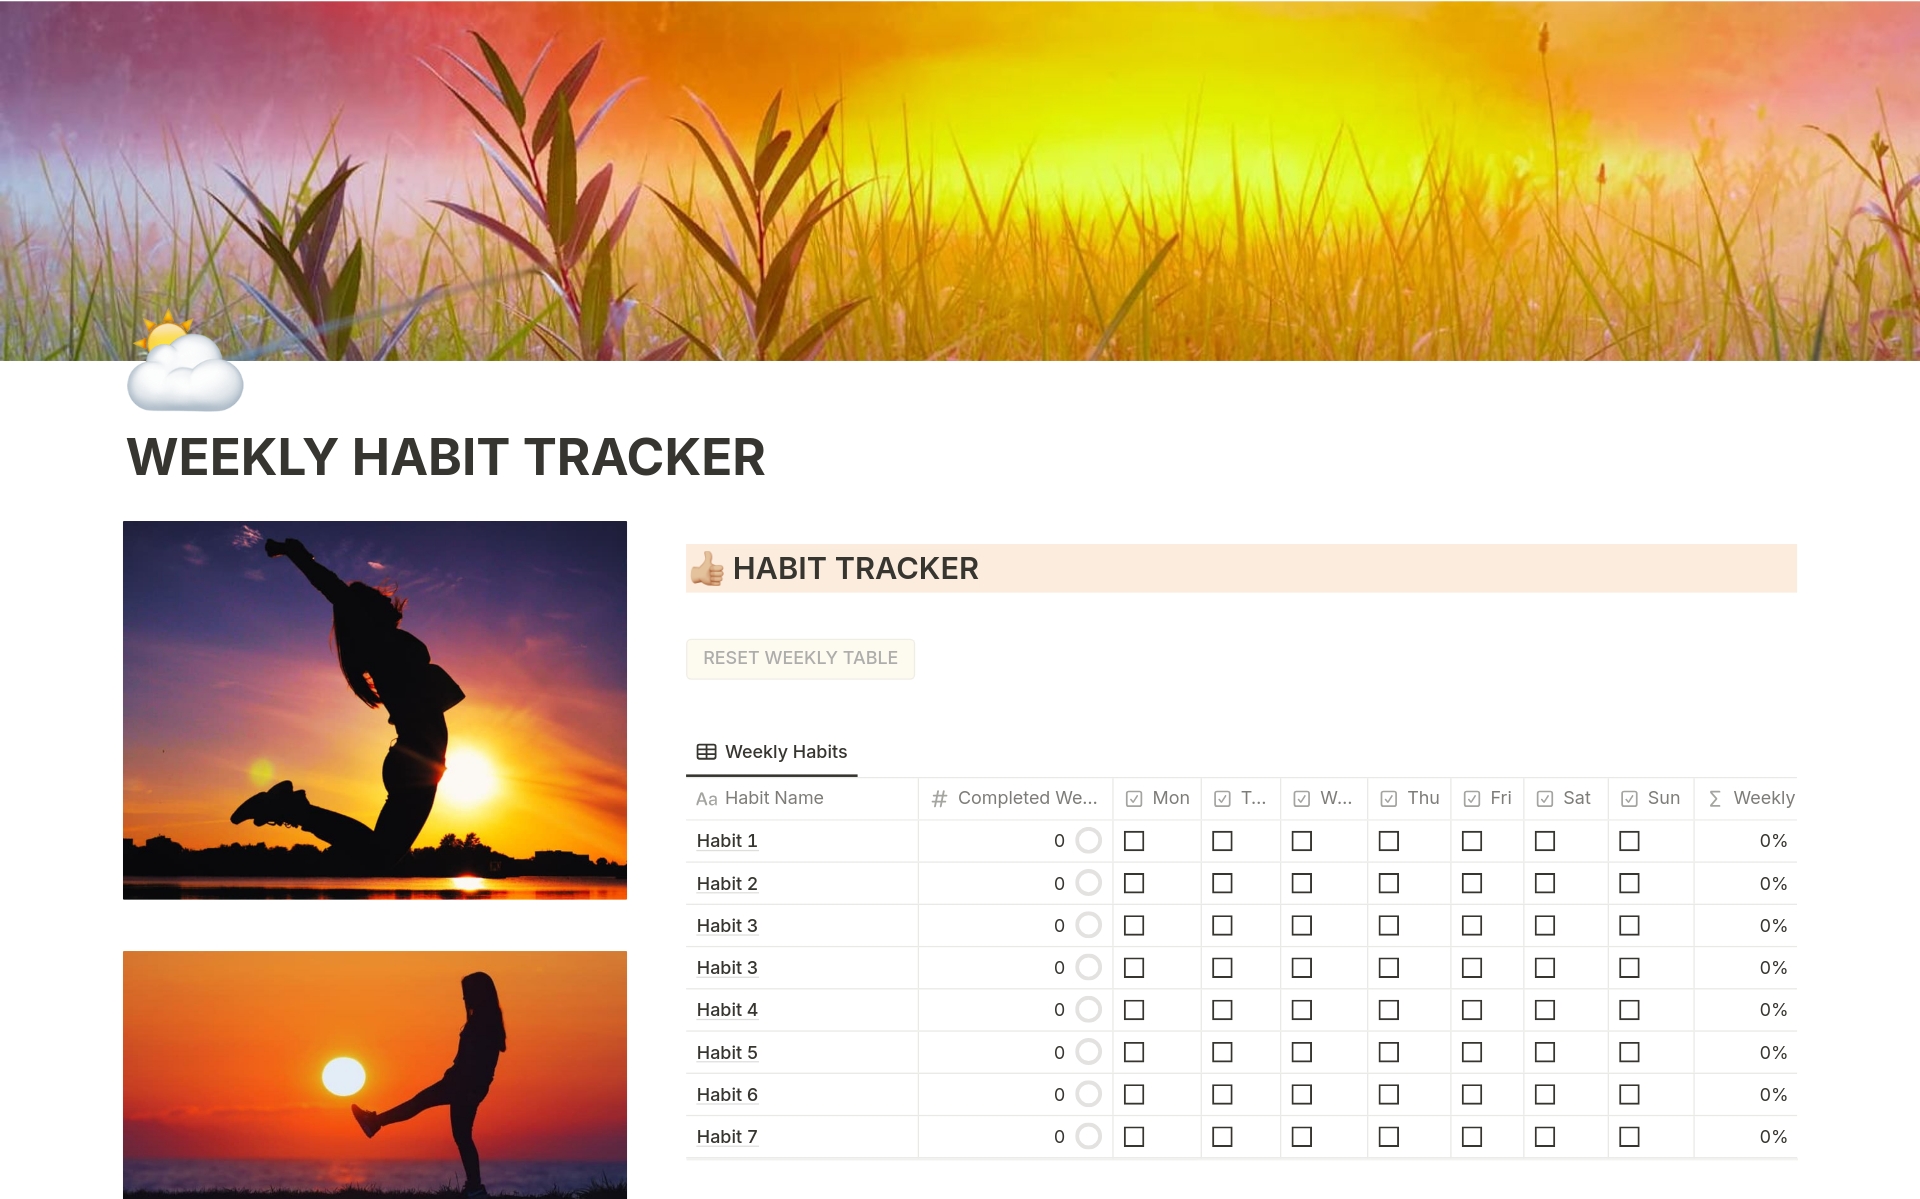 Track your habits with this vibrant weekly habit tracker template for Notion, that is straight forward and easy to use.